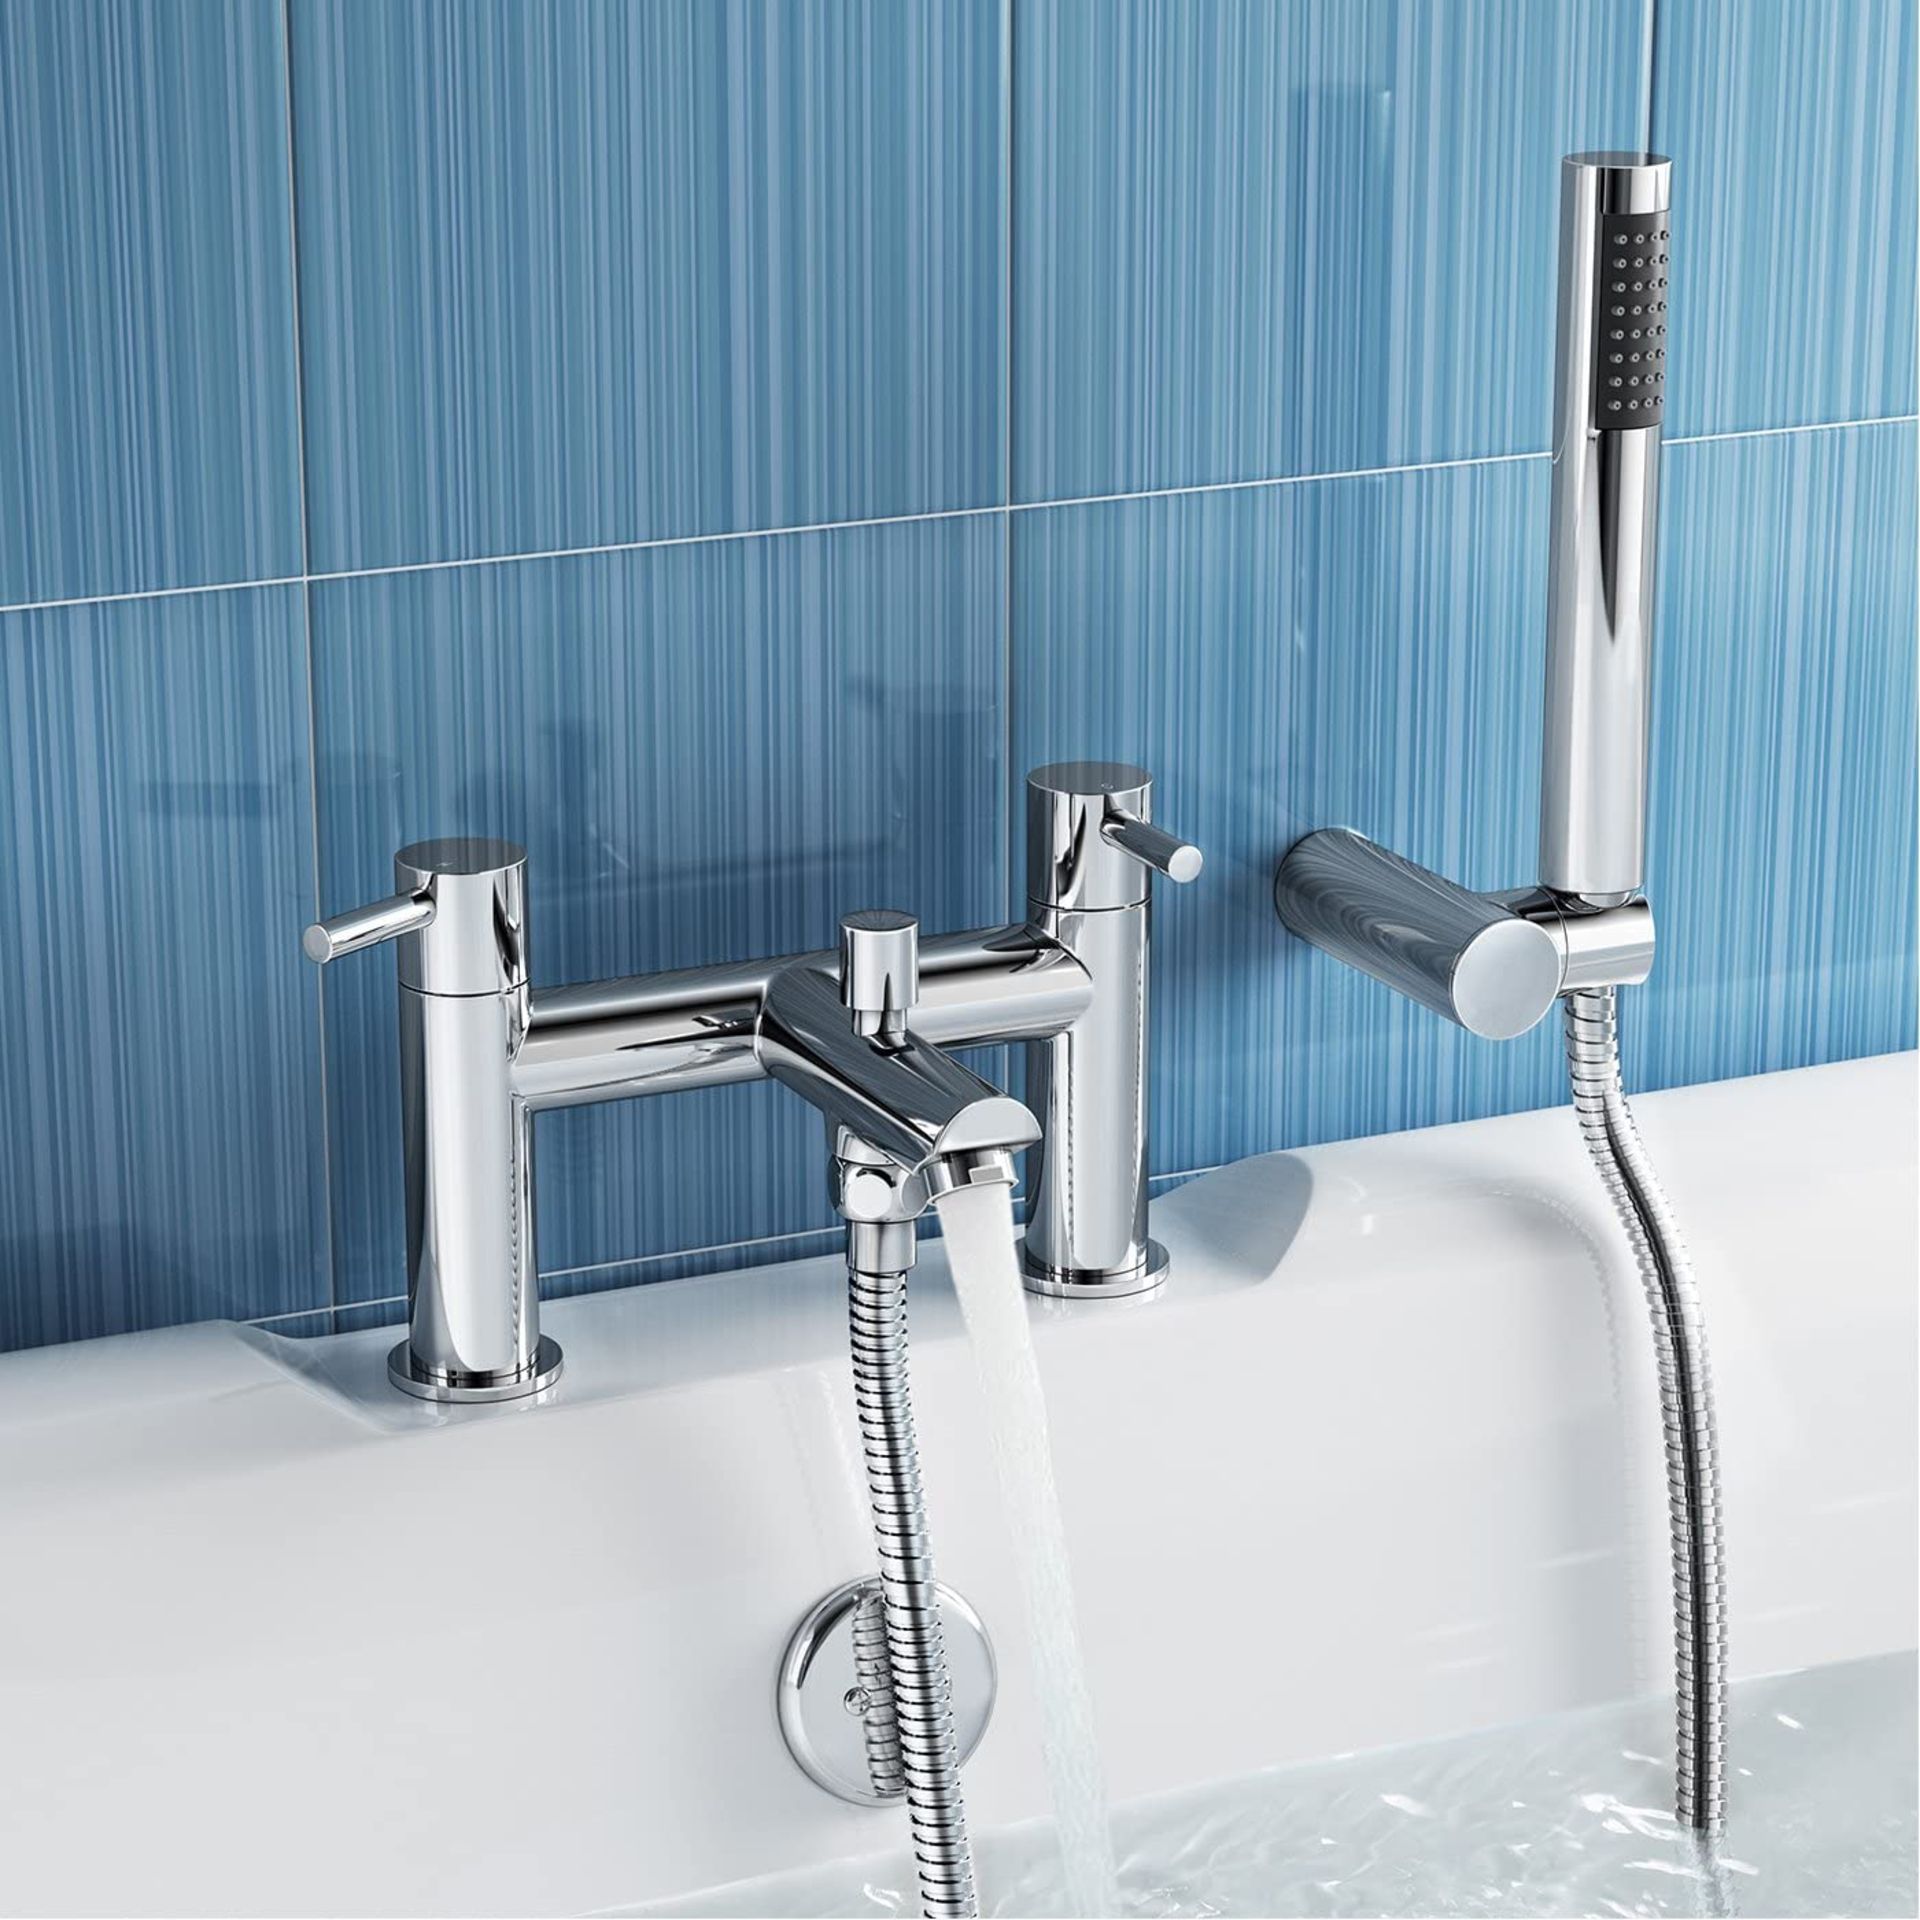 (MG1019) Bath Filler Mixer Tap with Modern Bathroom Shower Head. Chrome plated solid brass 1/4... - Image 2 of 3